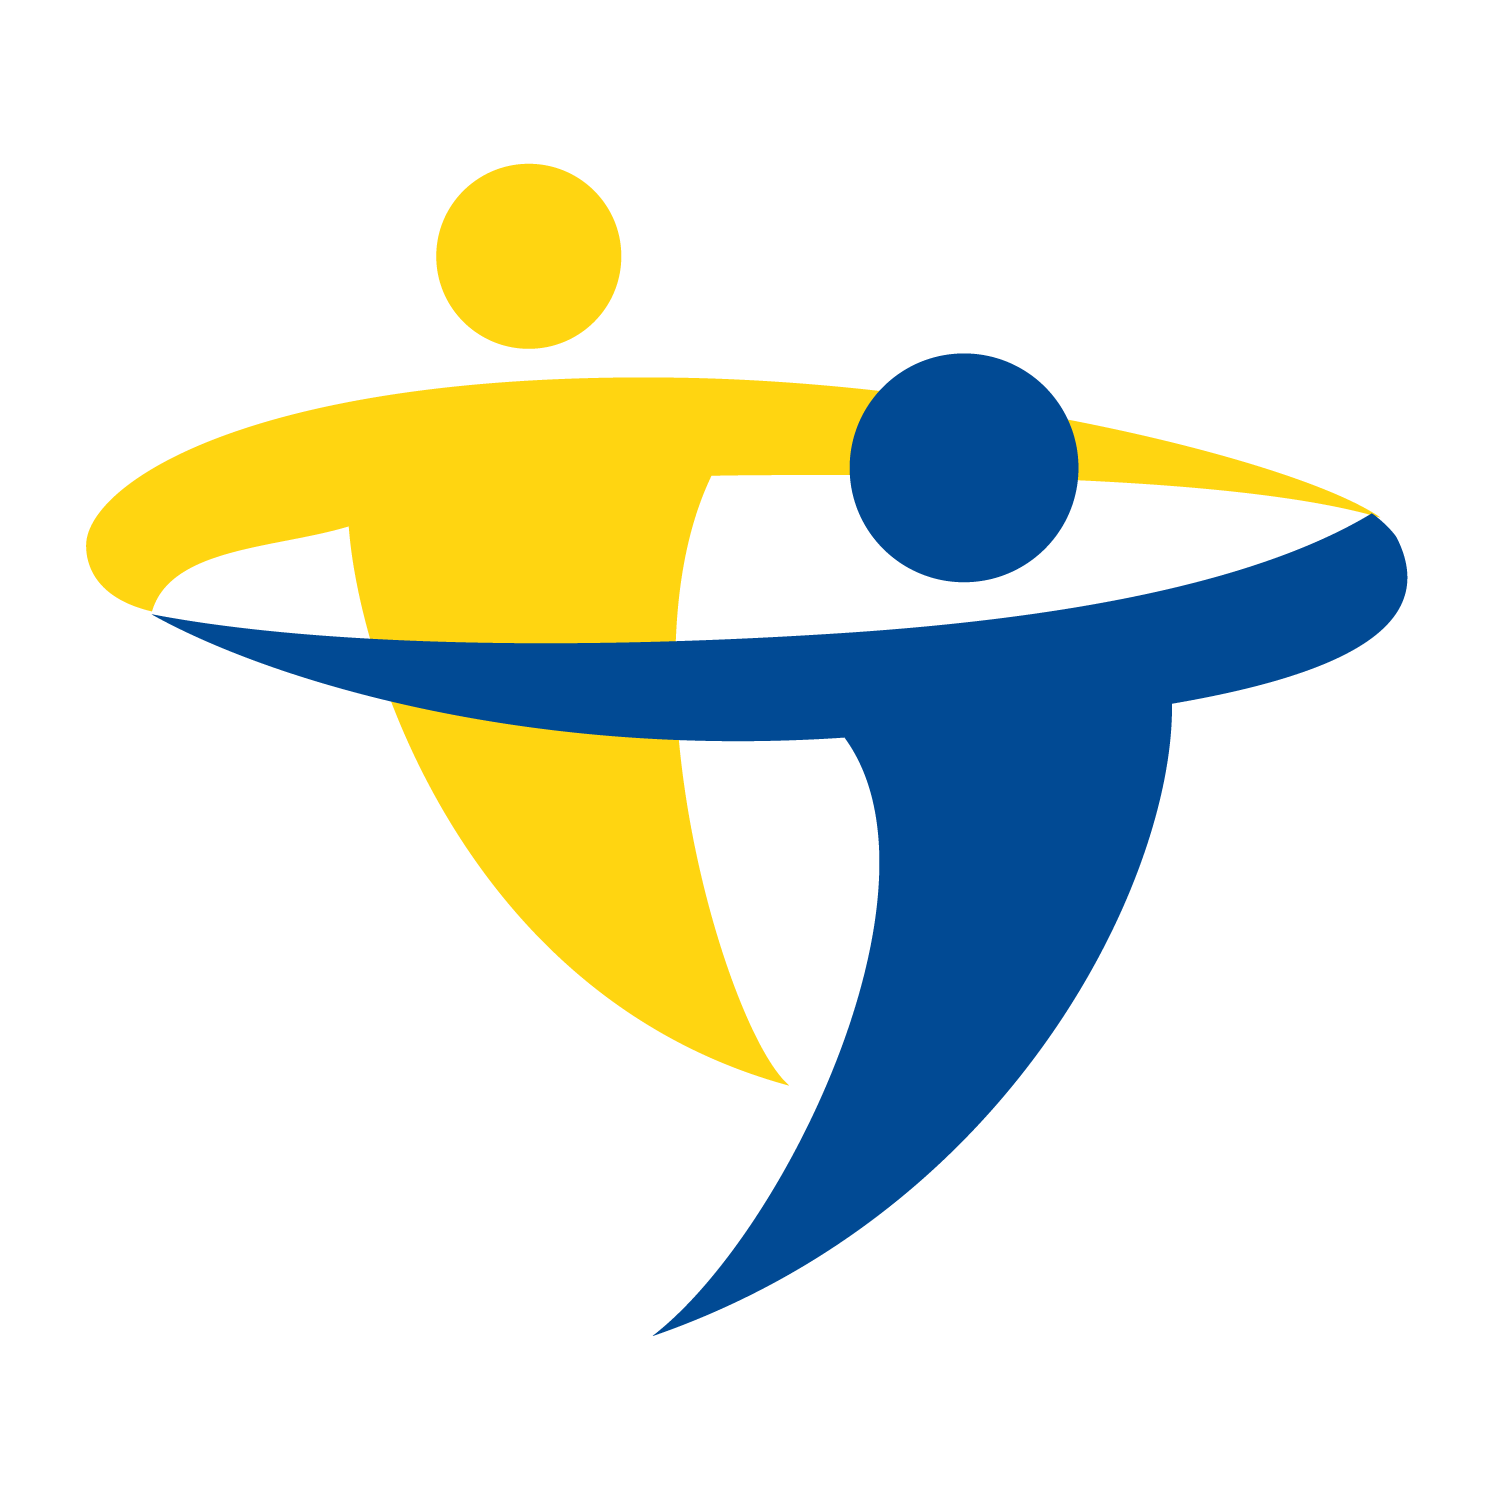 vocal-yellow-blue-people-logo